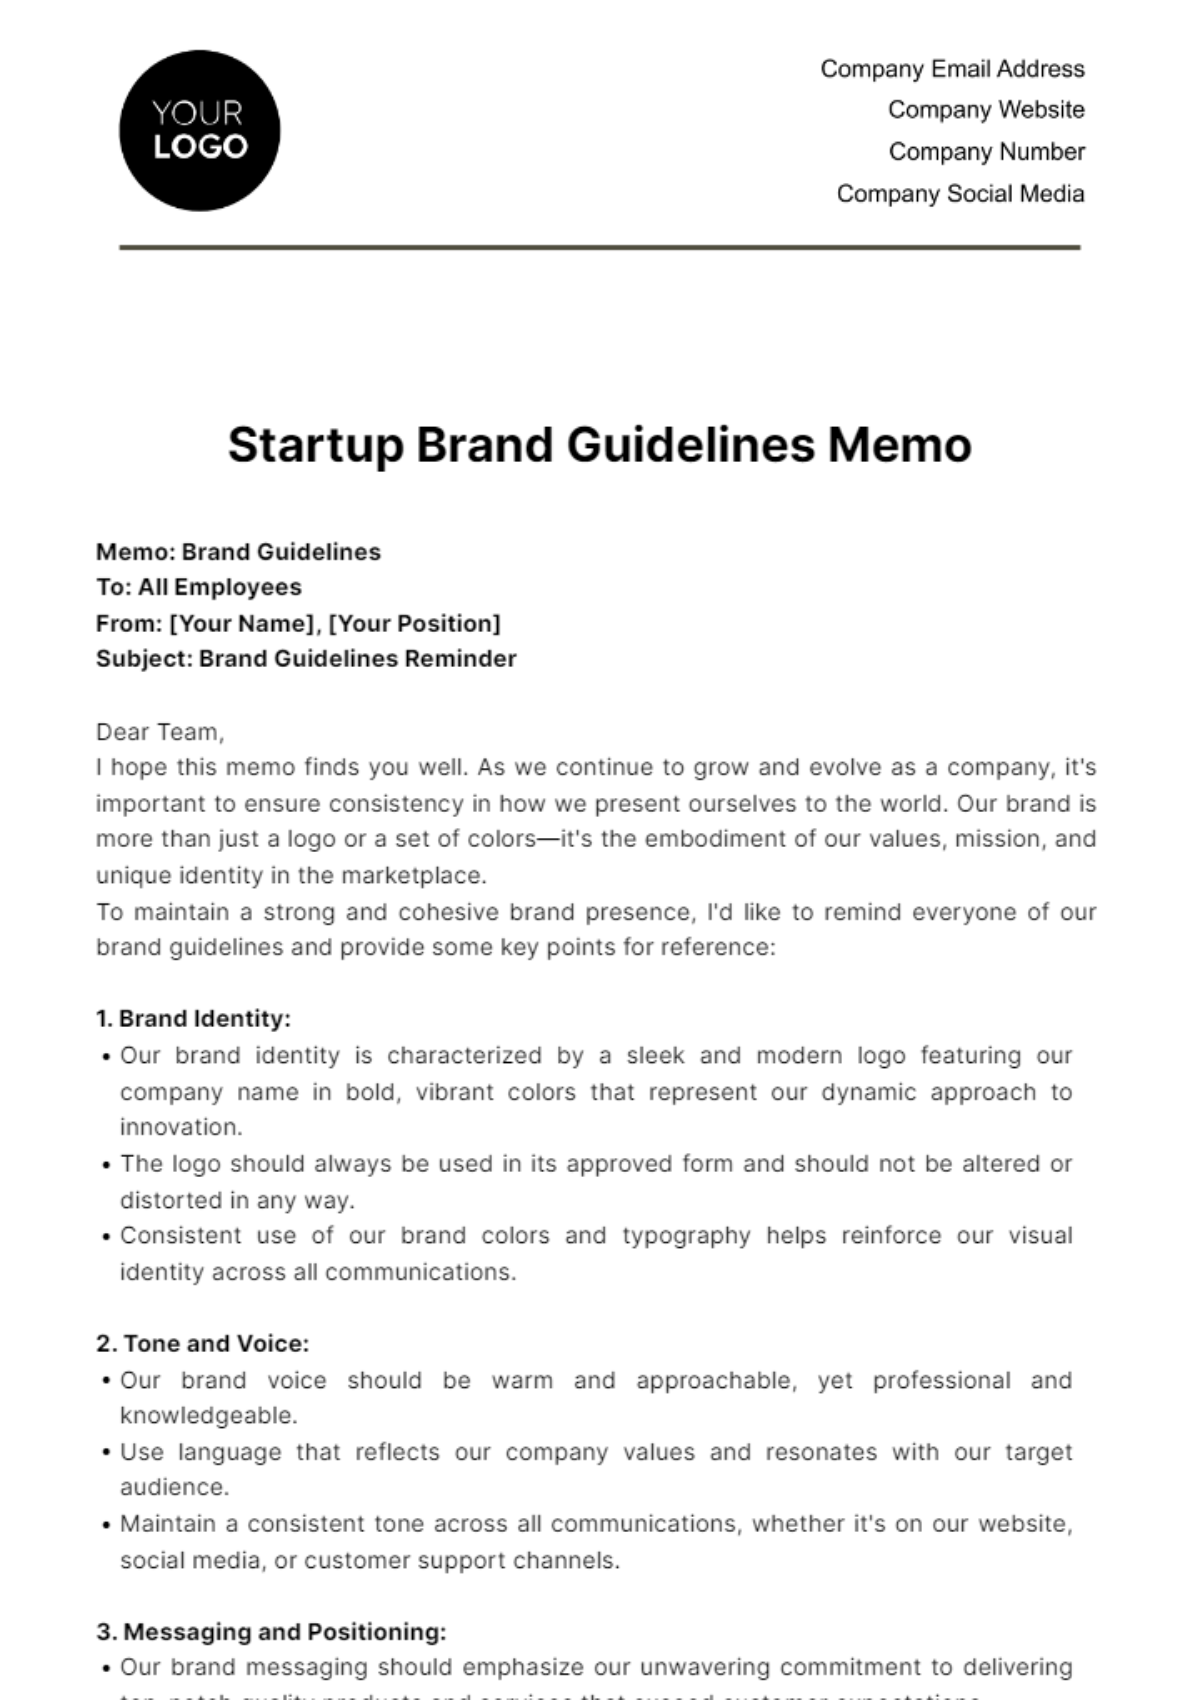 Free Startup Brand Guidelines Memo Template